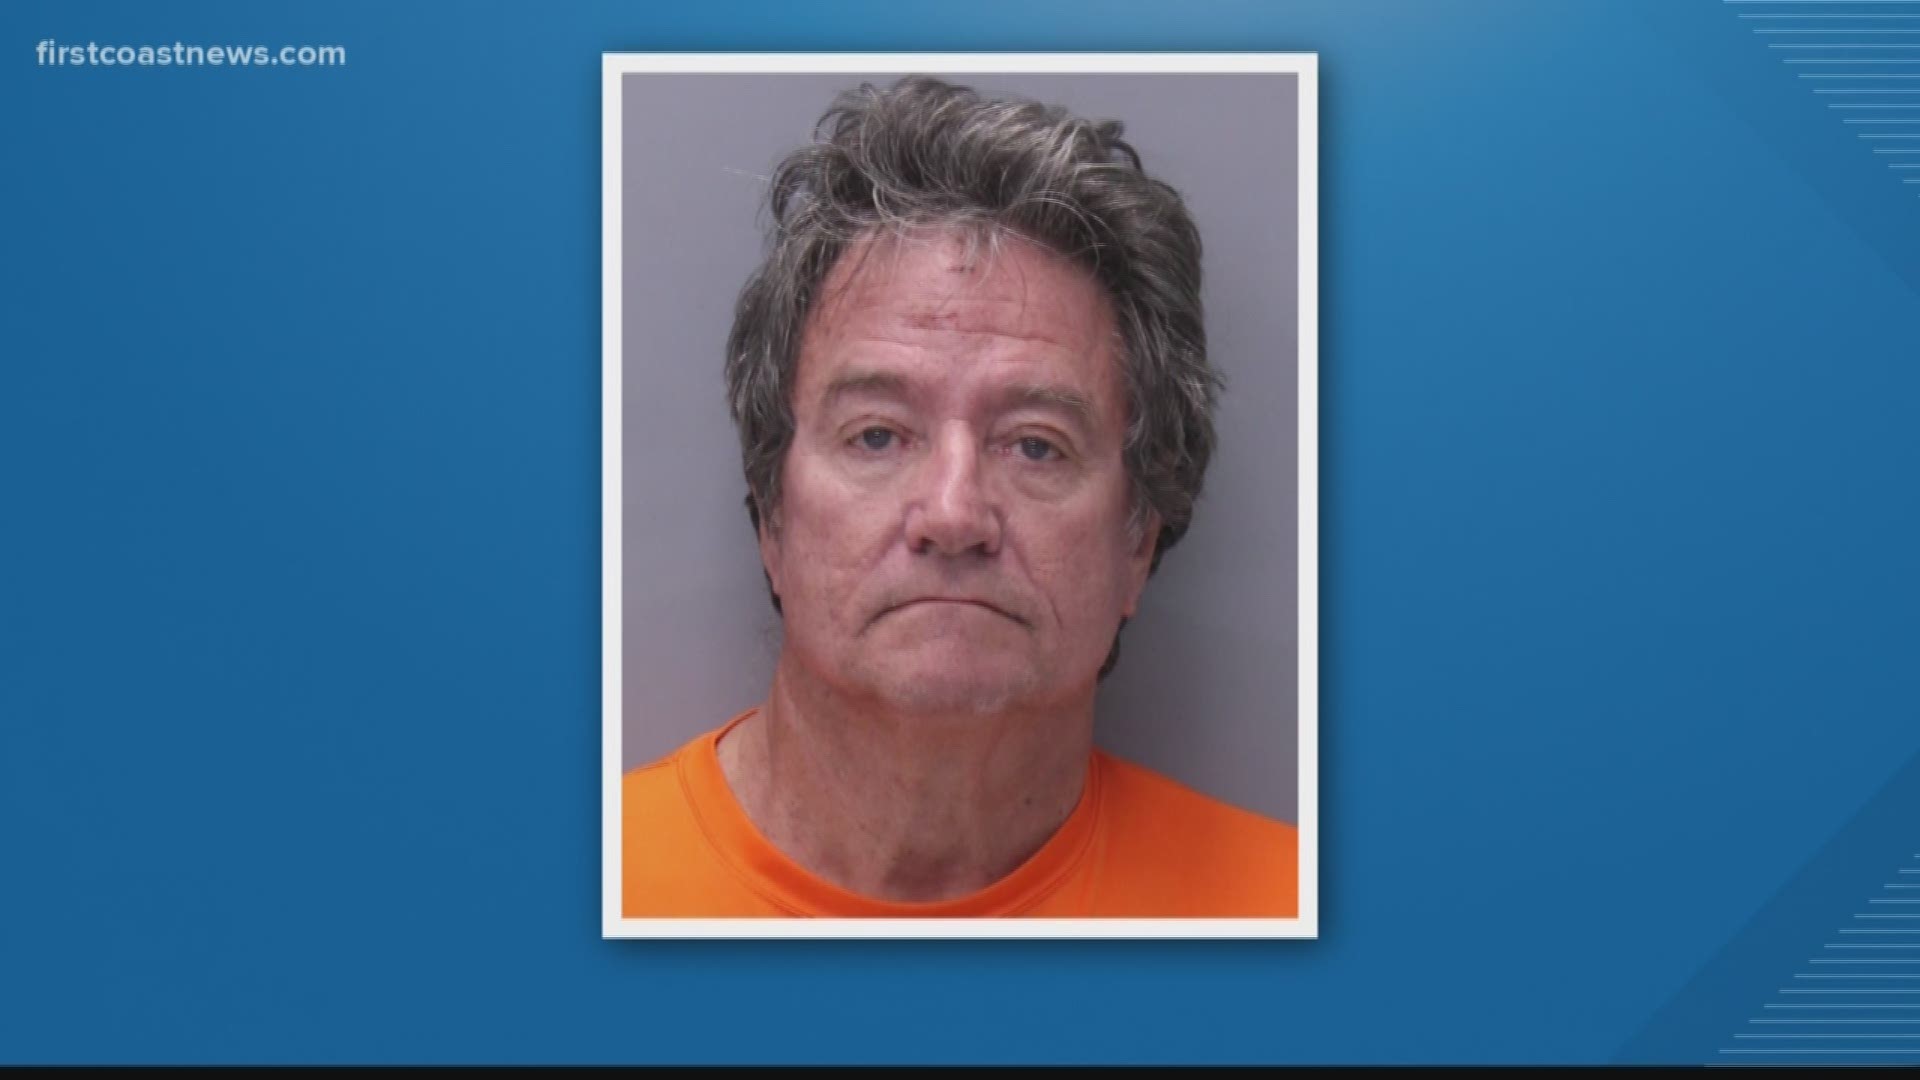 David Wayne Schroeder, 63, told deputies he thought the woman looked good and followed her, according to the arrest report.